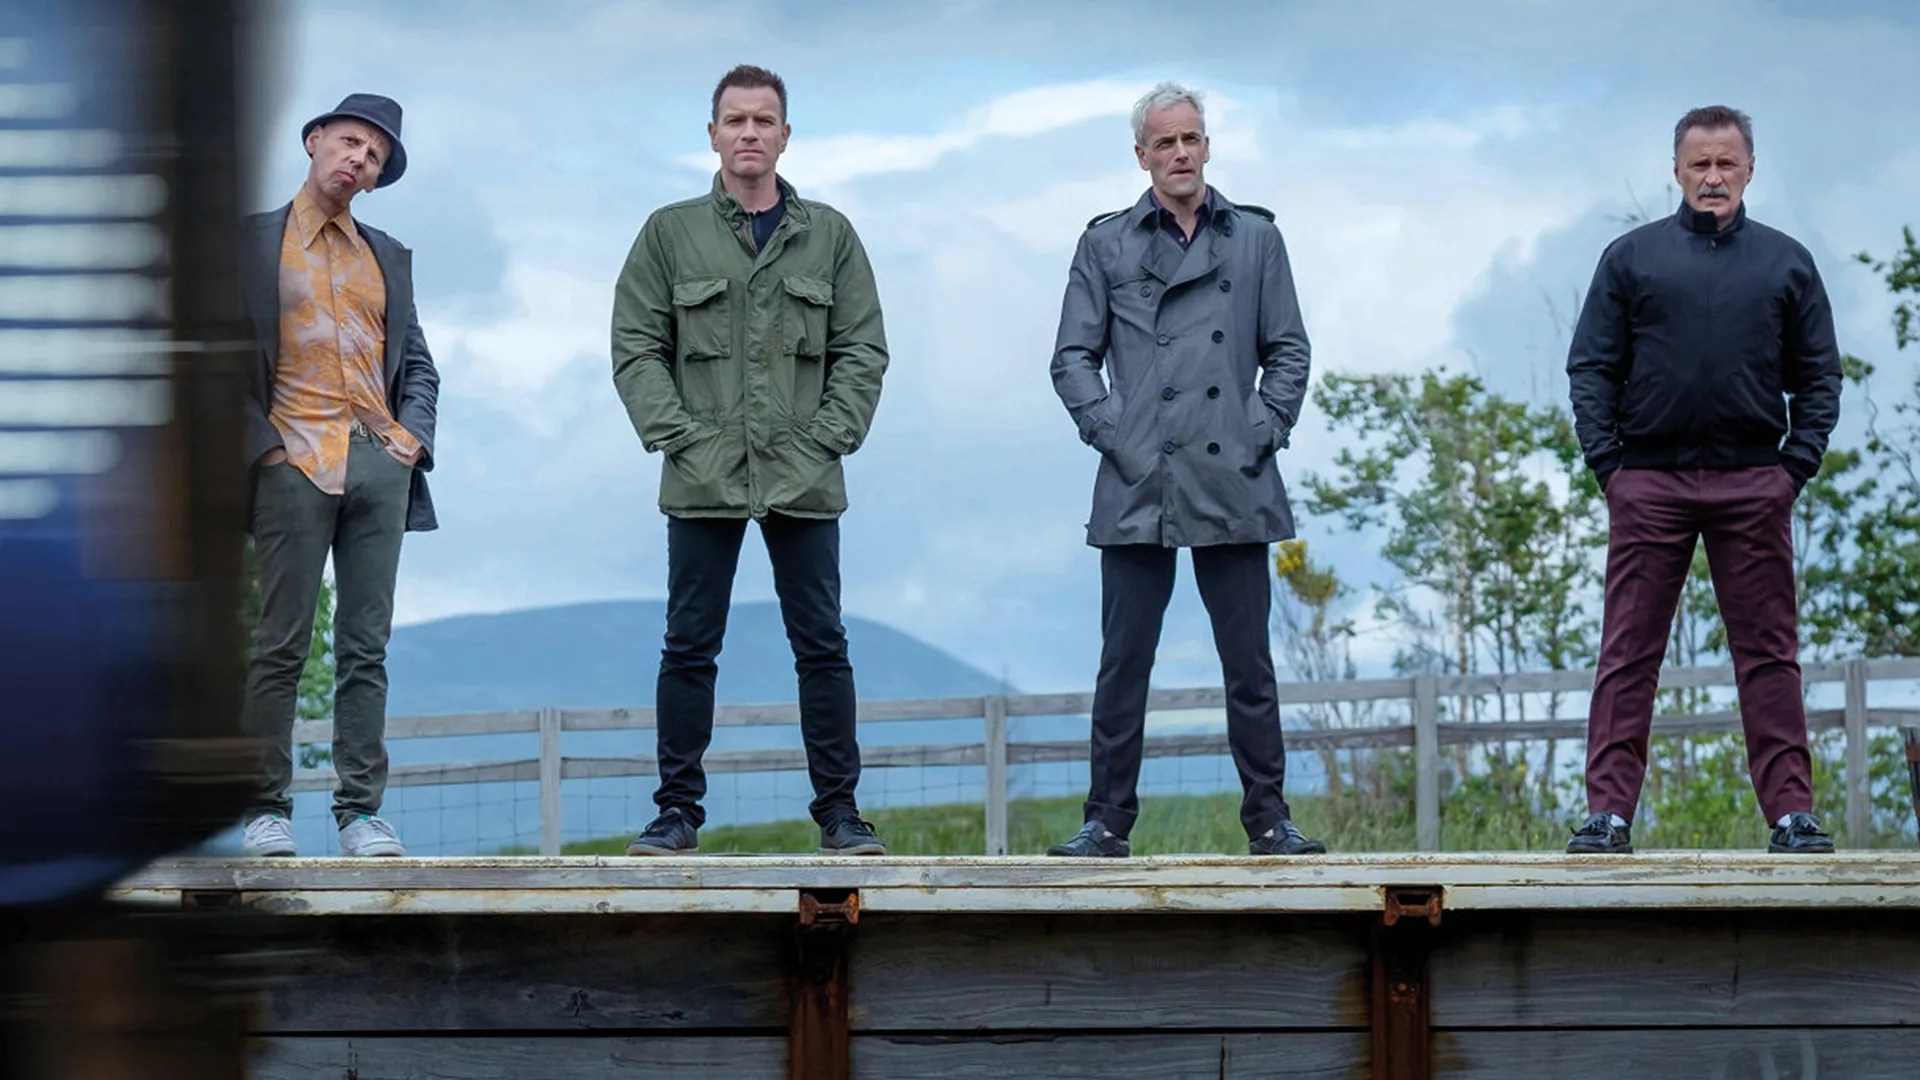 The cast of T2: Trainspotting